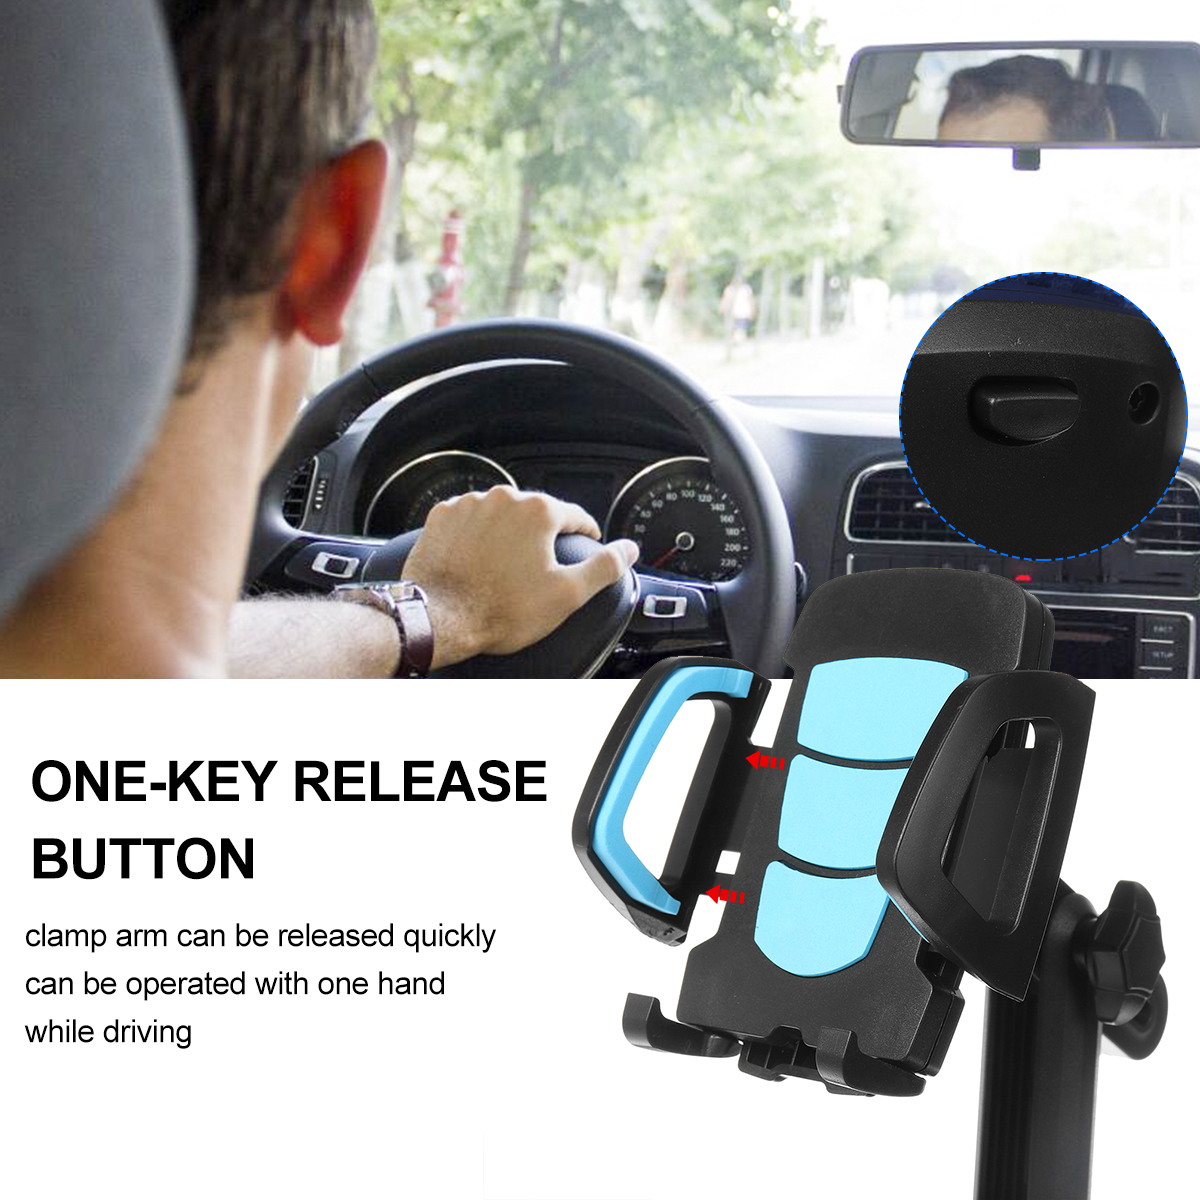 Bakeey-Car-Mount-360deg-Adjustable-Cup-Holder-Cradle-for-iPhone-12-for-Samsung-Galaxy-Note-20-ultra--1778684-1